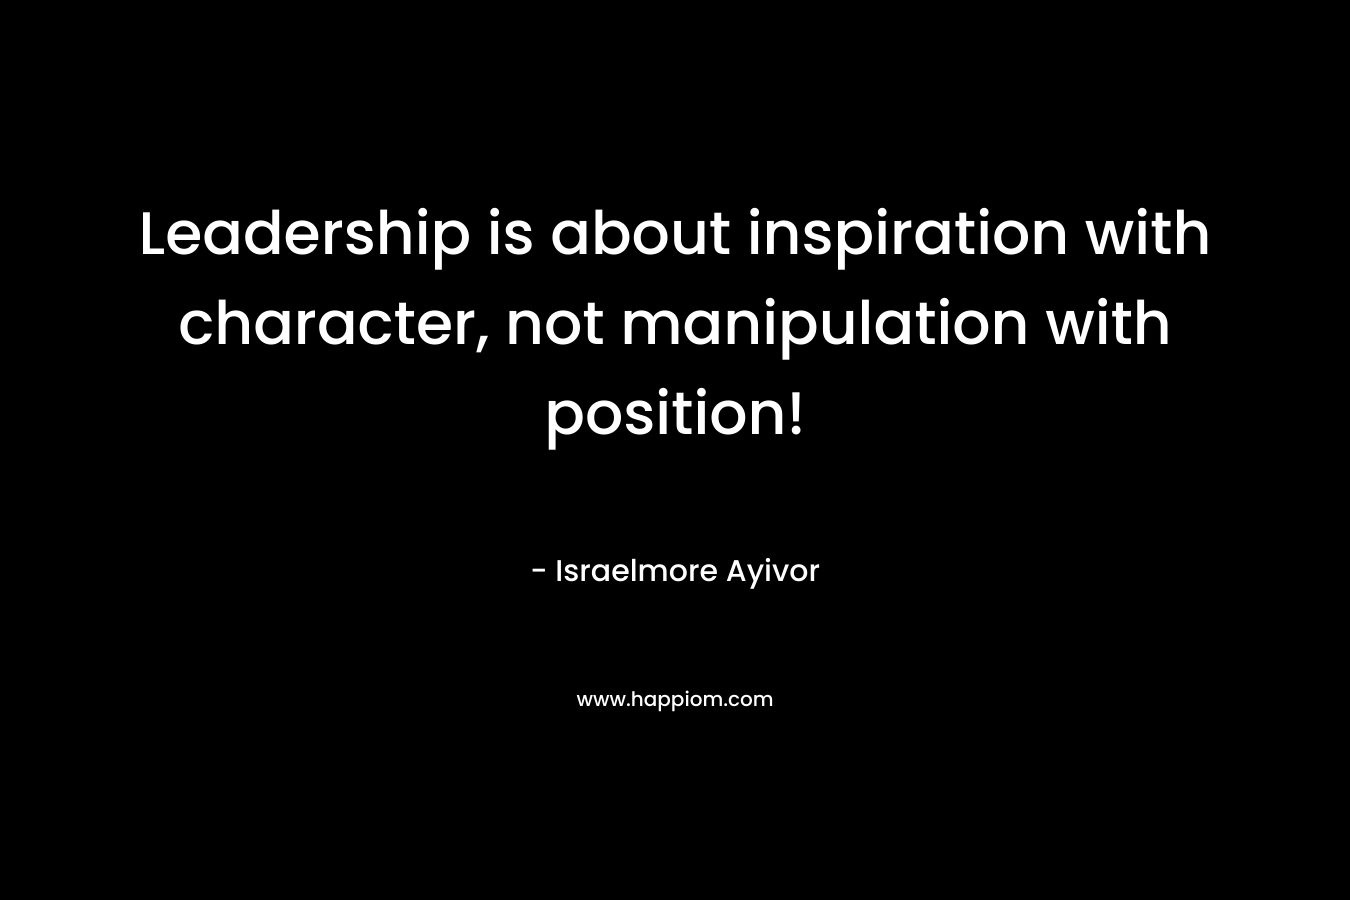 Leadership is about inspiration with character, not manipulation with position!